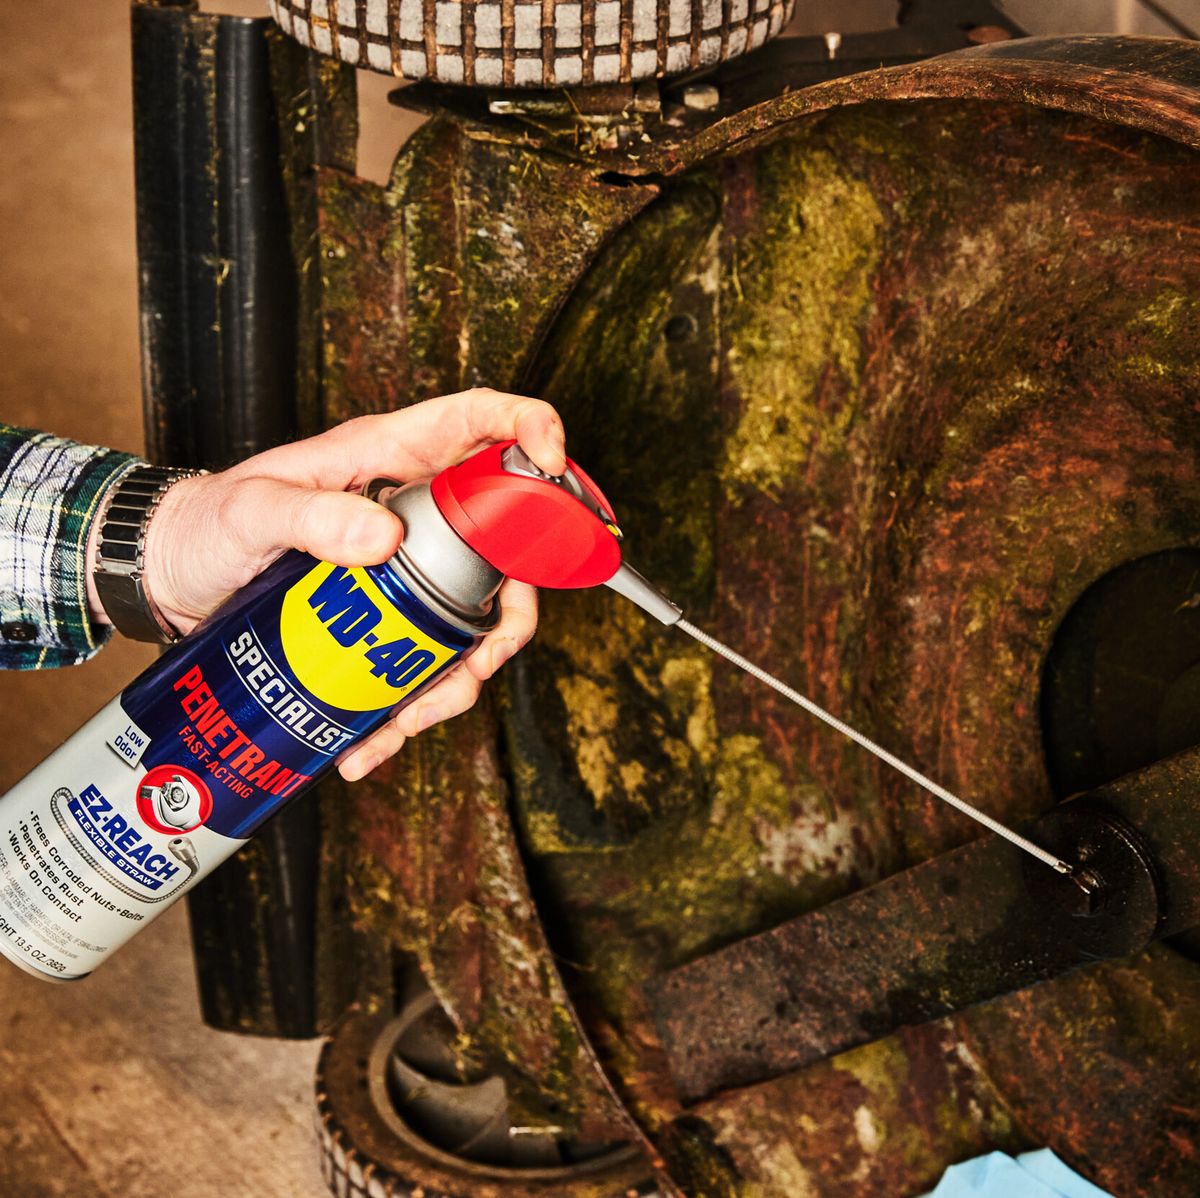 WD-40 400 ml Aerosol Electrical Contact Cleaner for Various Applications